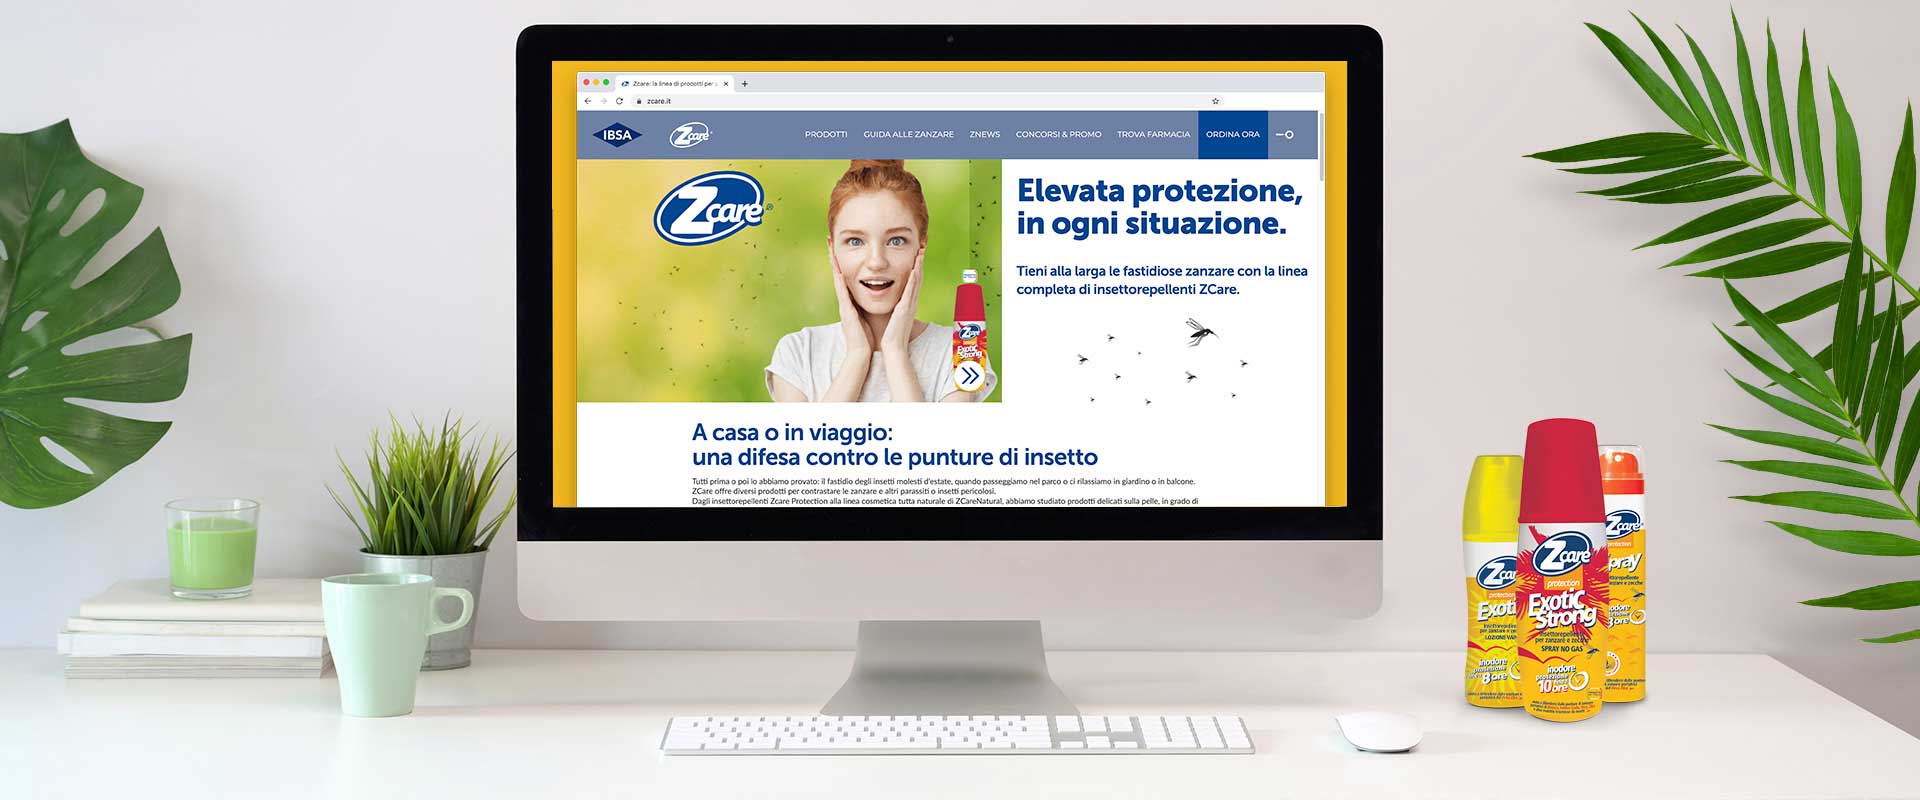 Web and digital redesign ATC - All Things Communicate, pfot the new ZCare website